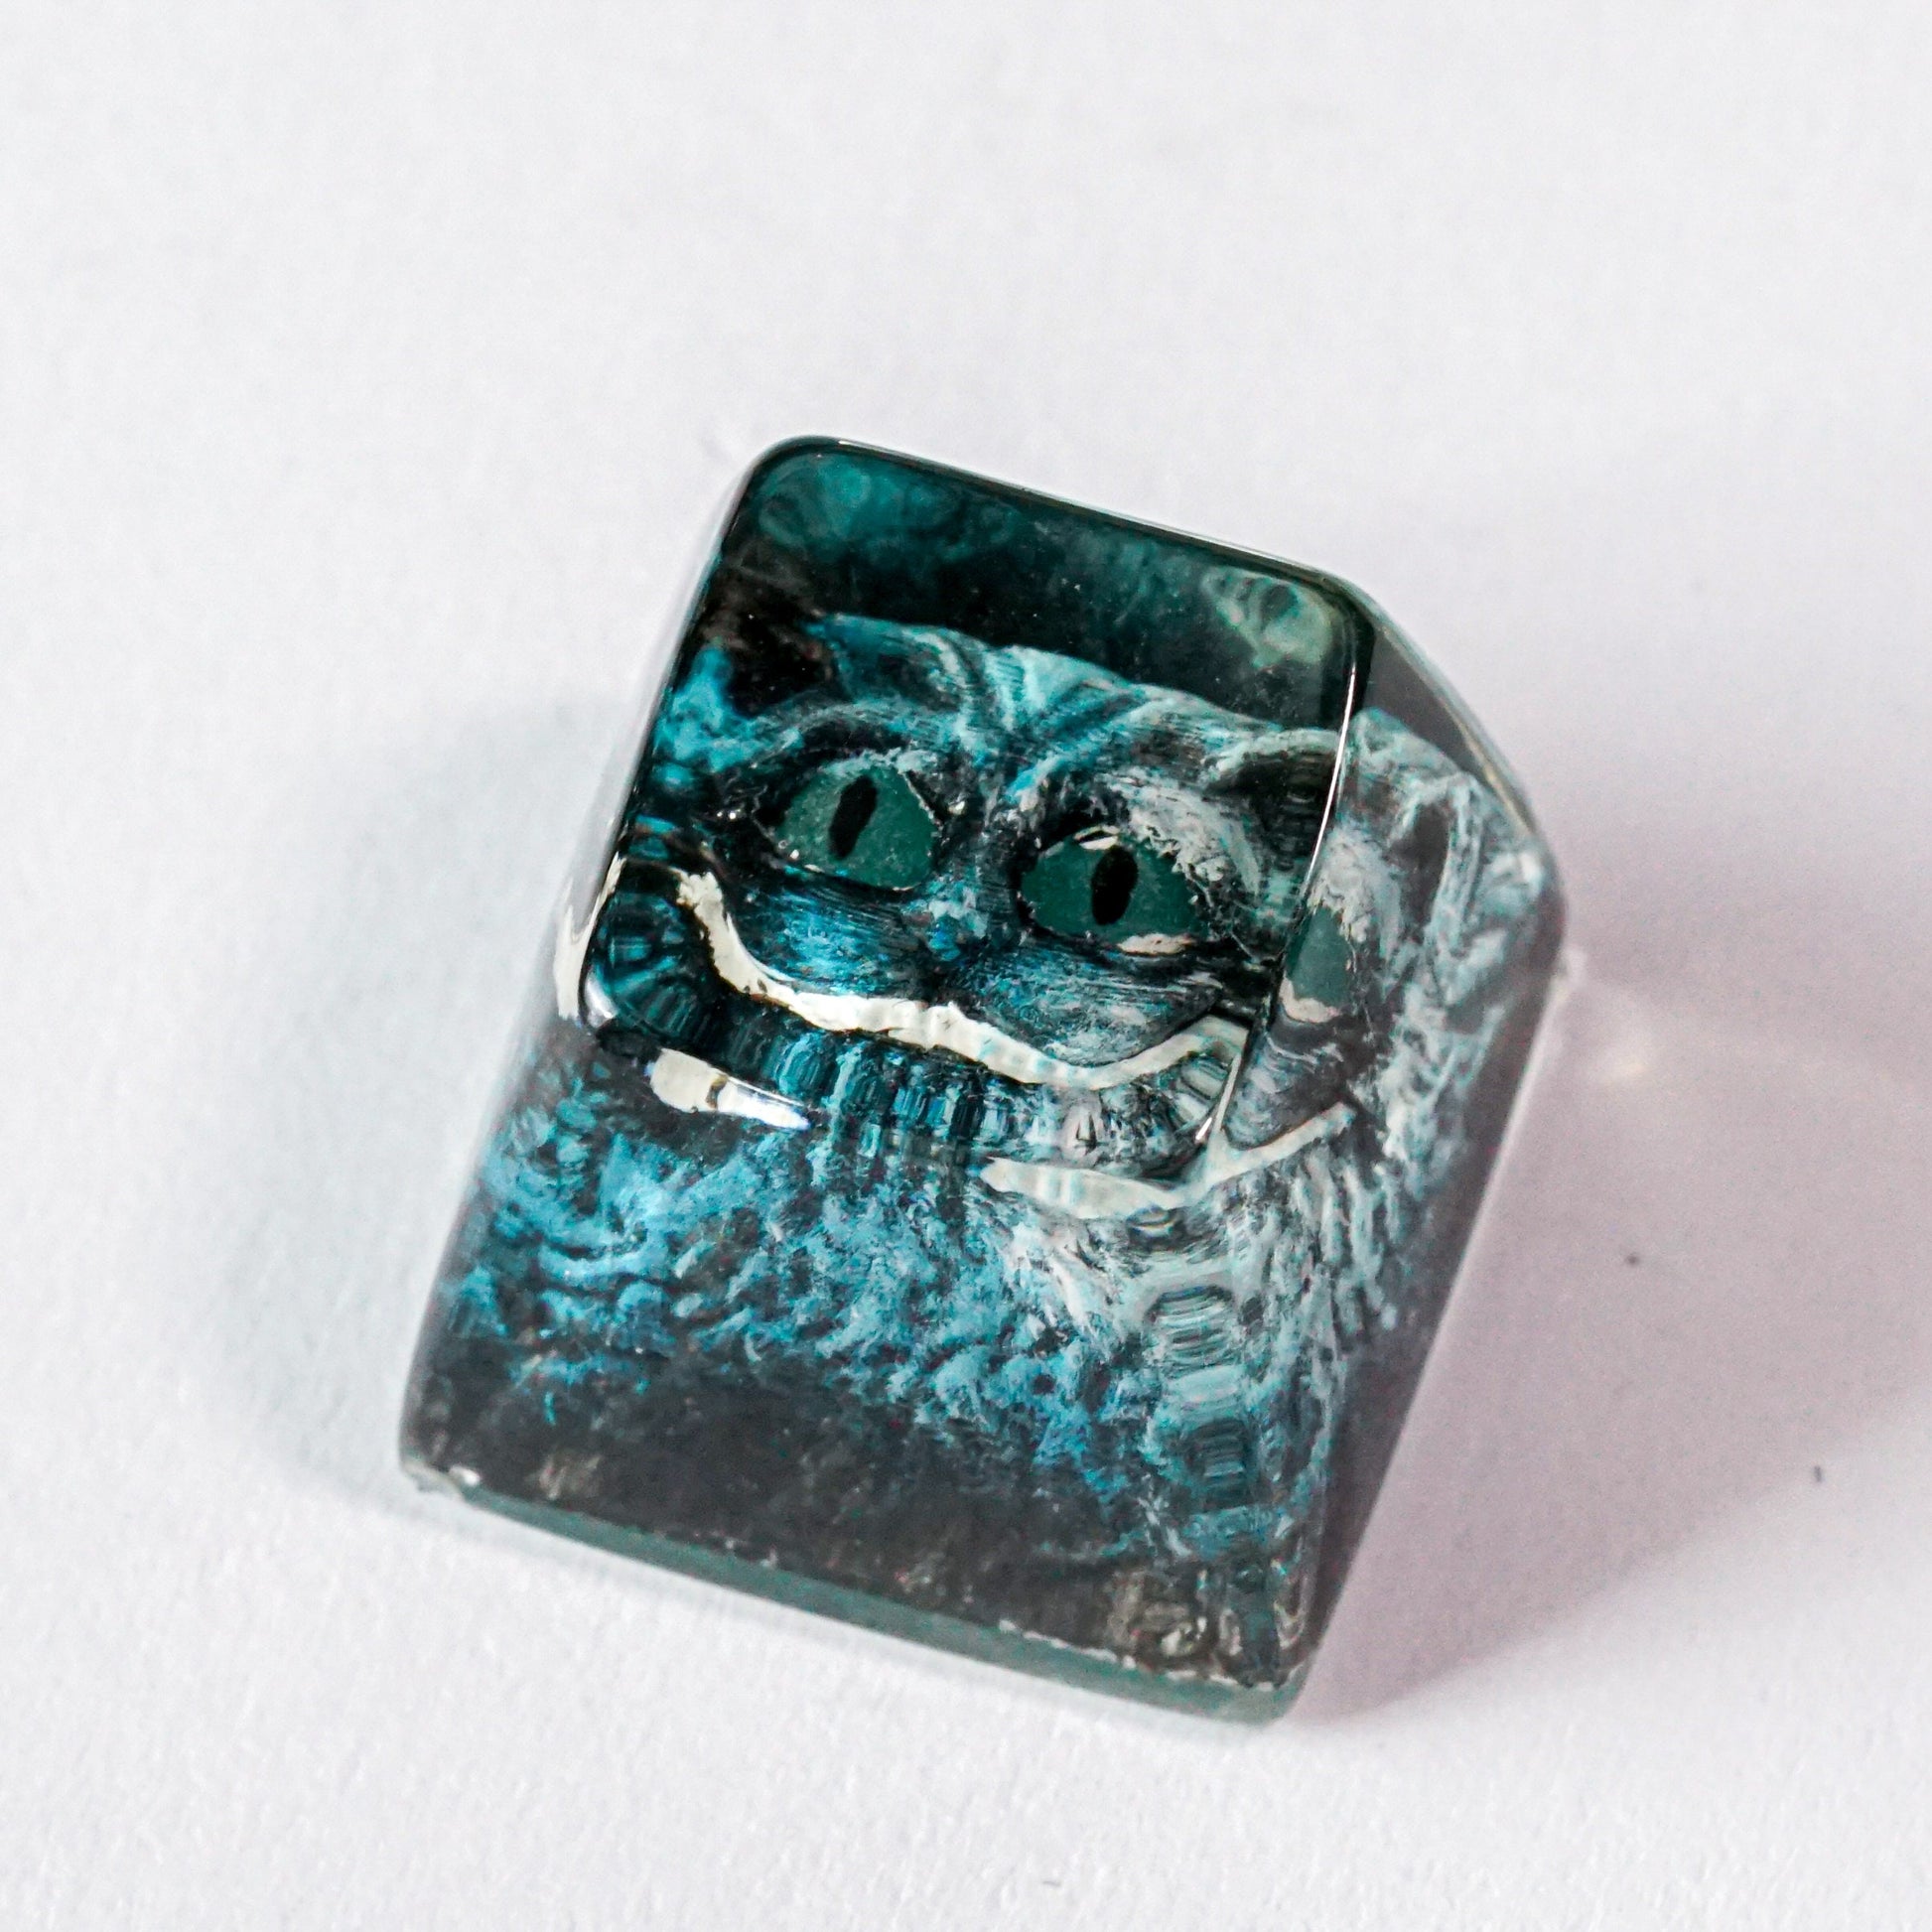 Cat Face Keycap- Cat Keycap- Keycap For Cherry MX Switches Mechanical Keyboard- Gift for Cat Lover - Datkey Studio